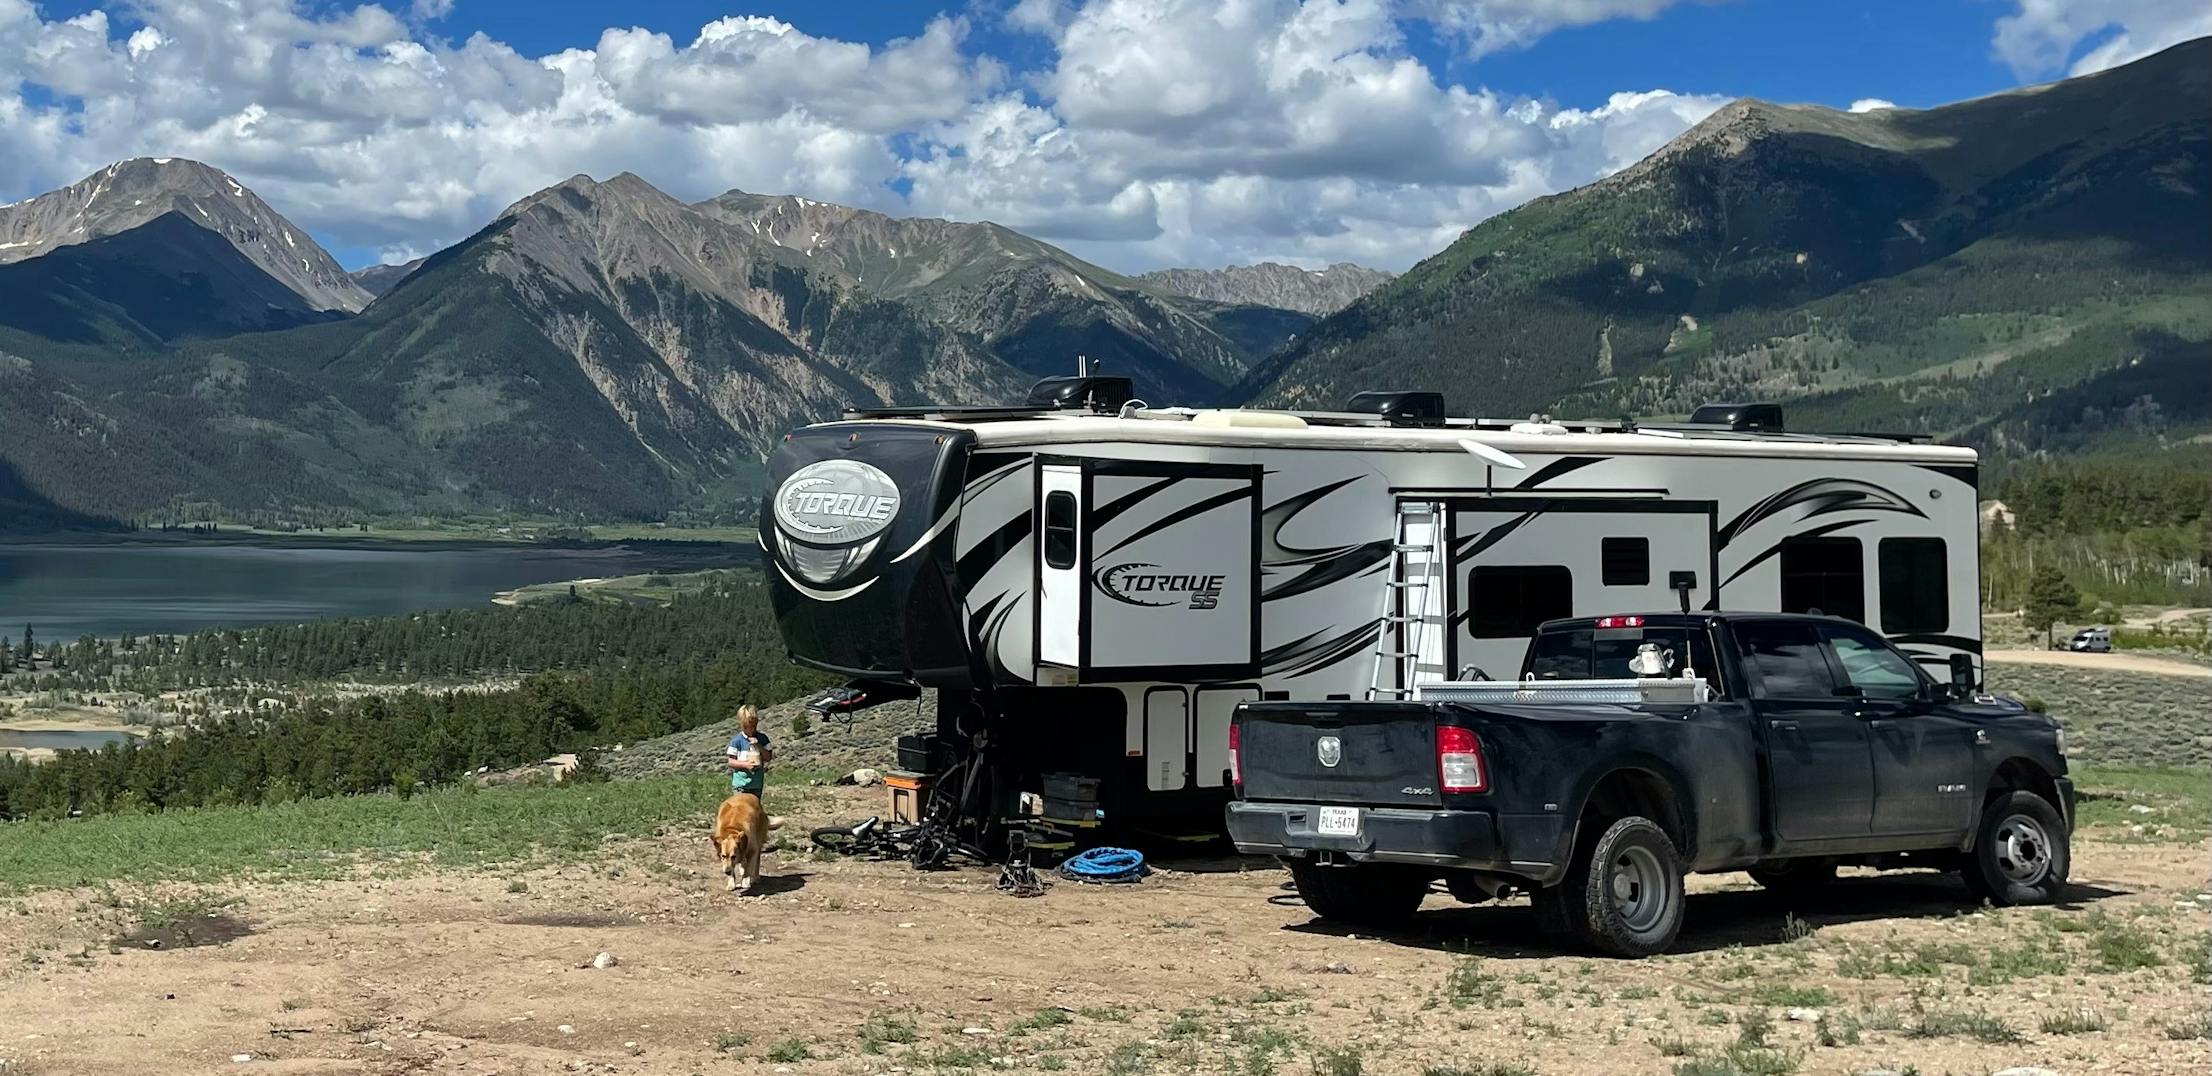 Melissa and Lucas Lahr's Heartland Torque toy hauler at a scenic lookout featuring mountains  and cloudy skies.